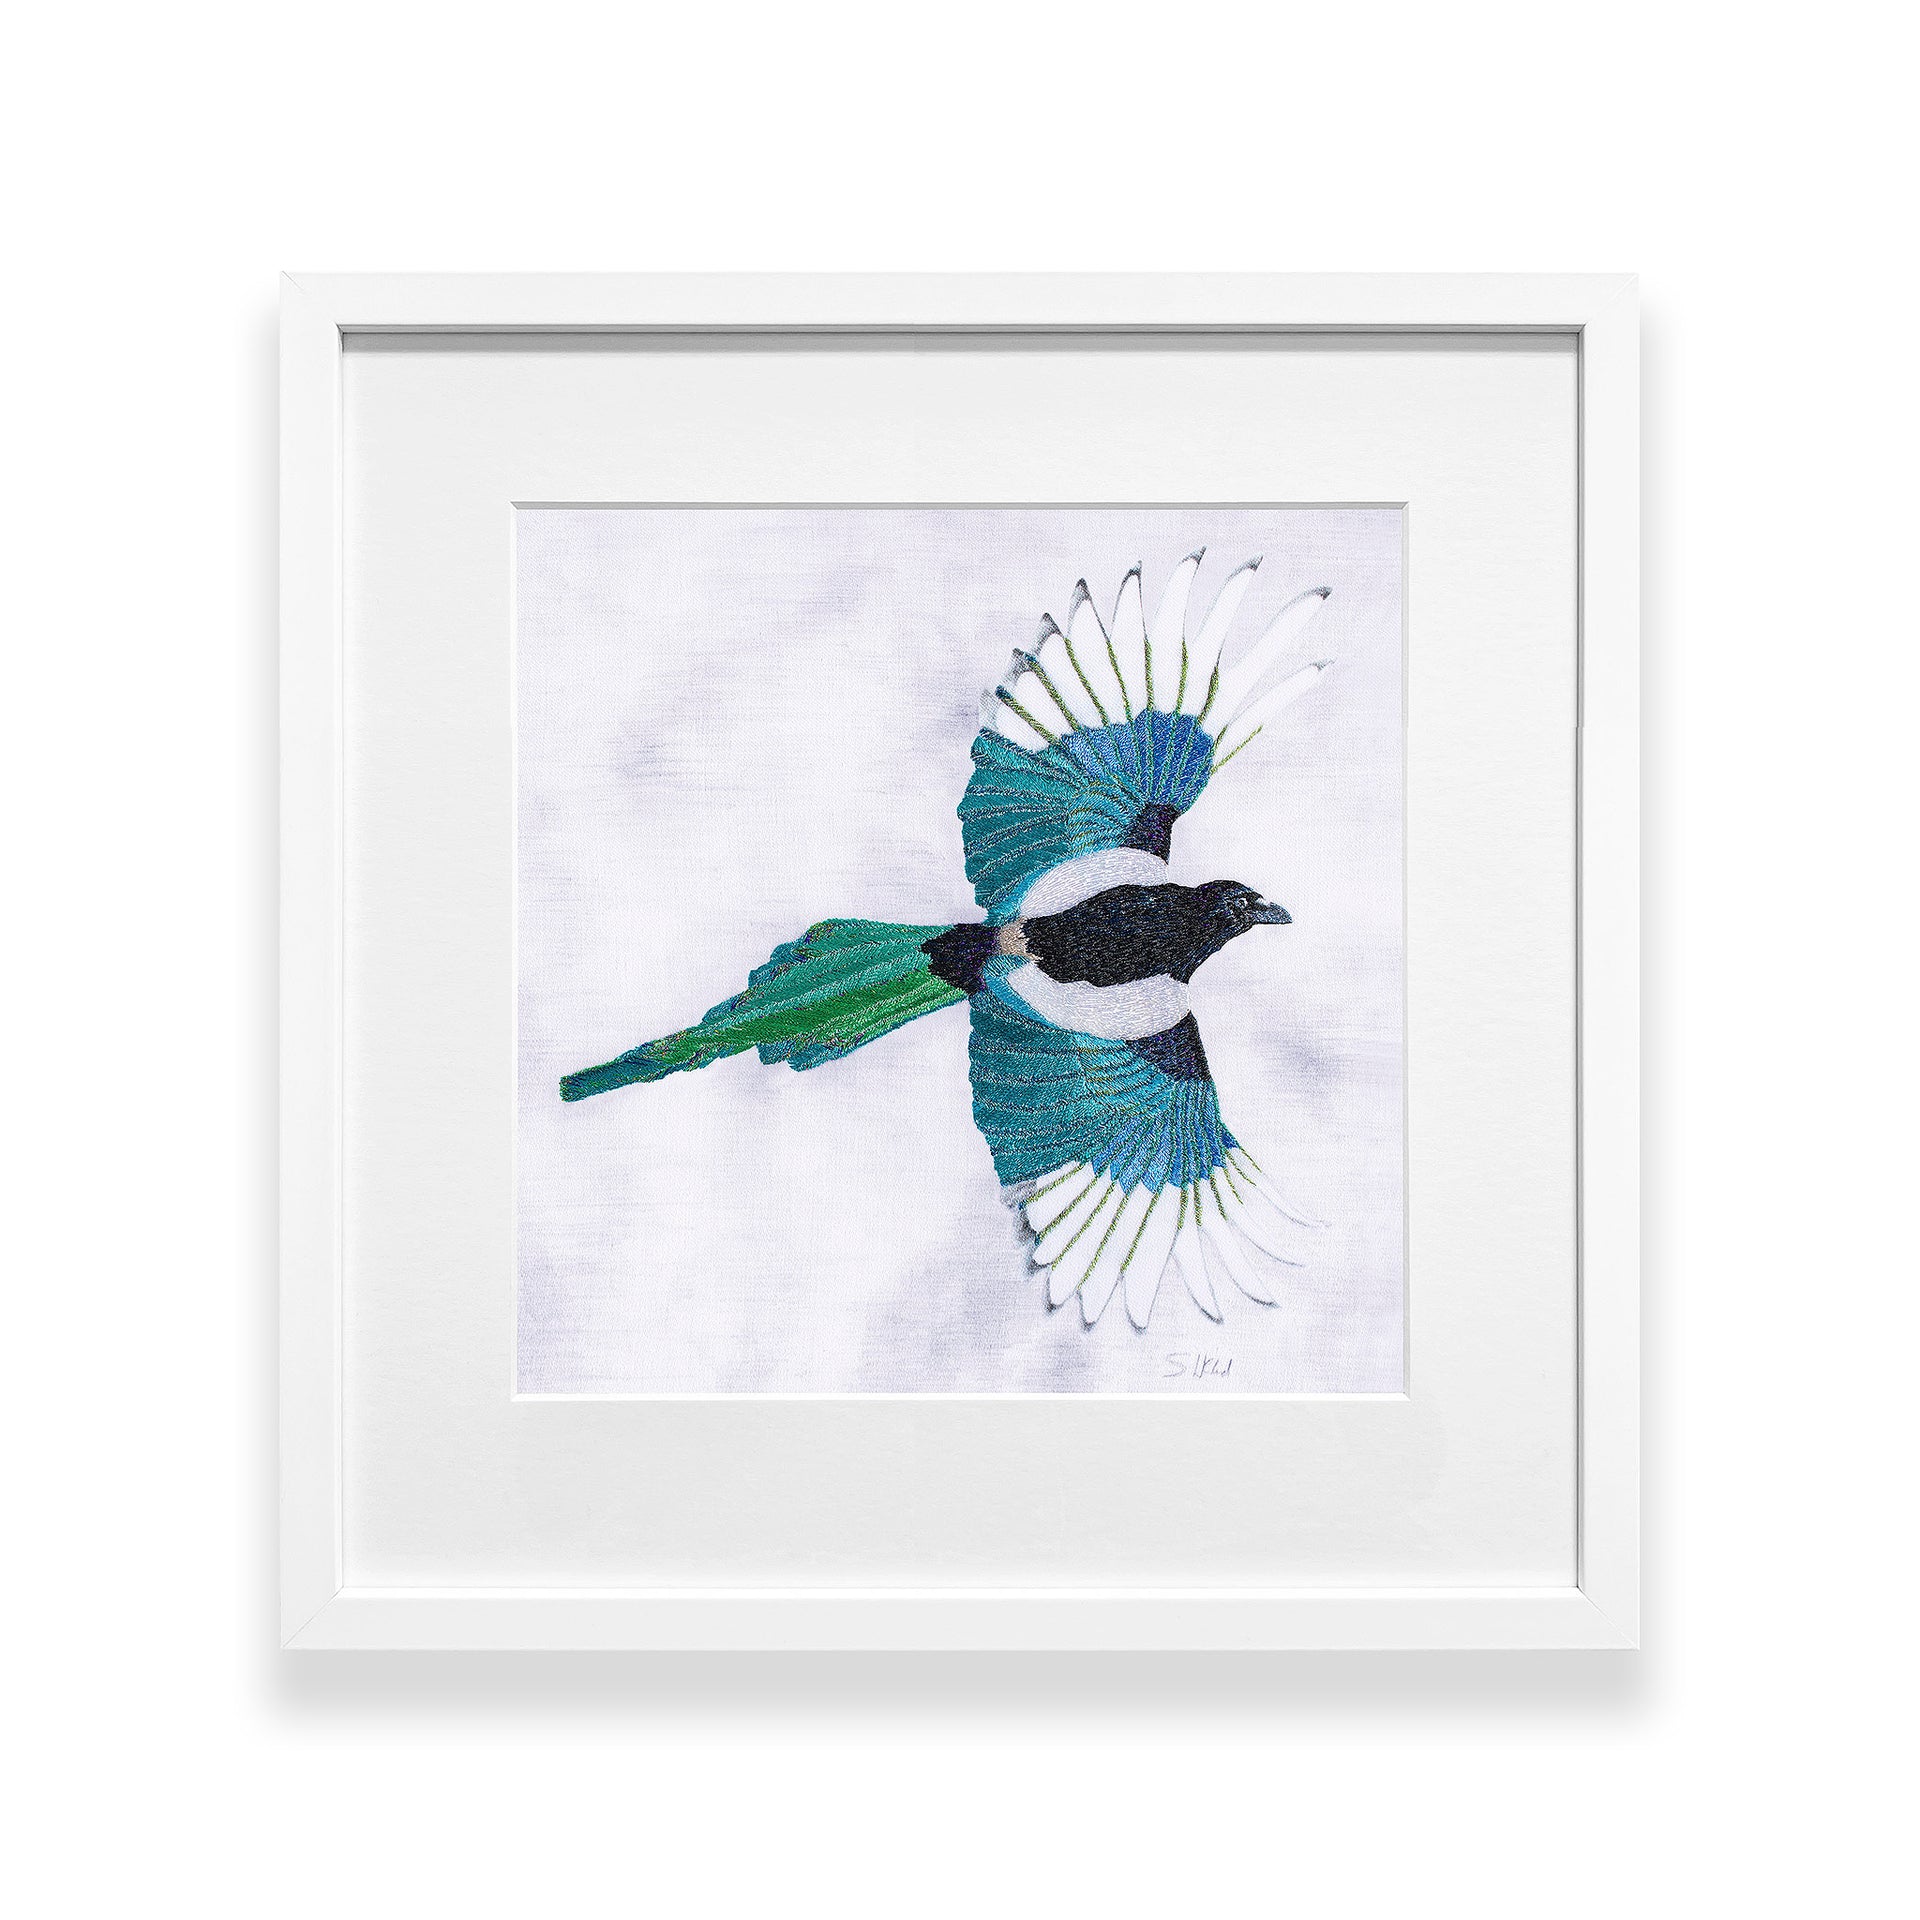 Hand embroidered flying Magpie artwork in white frame